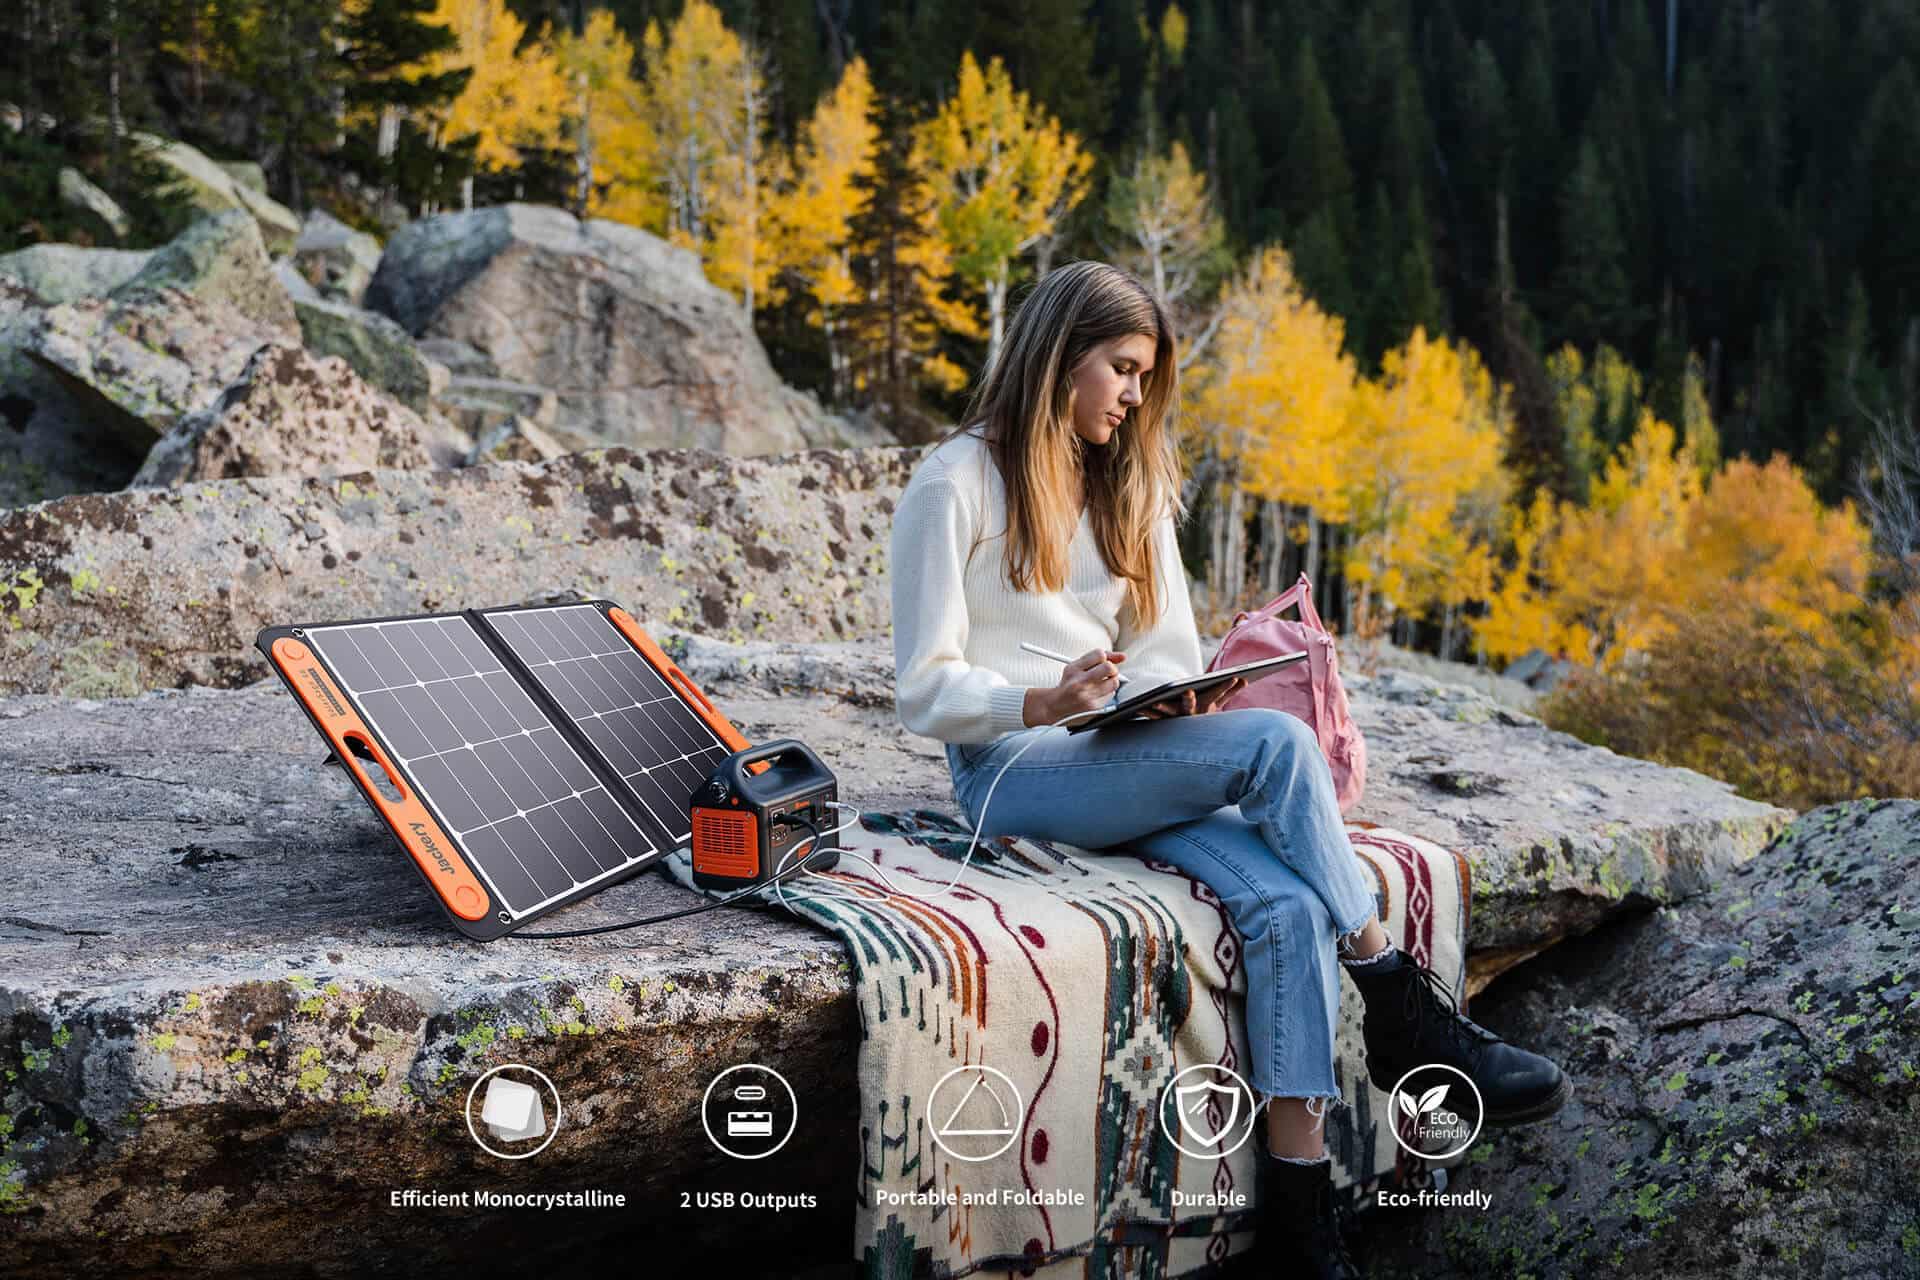 Jackery Solarsaga 100 W Pro Solar Panel for Explorer Portable Solar Portable Foldable Solar Charger for Summer Camping Van Lithium Battery High Conversion Efficiency